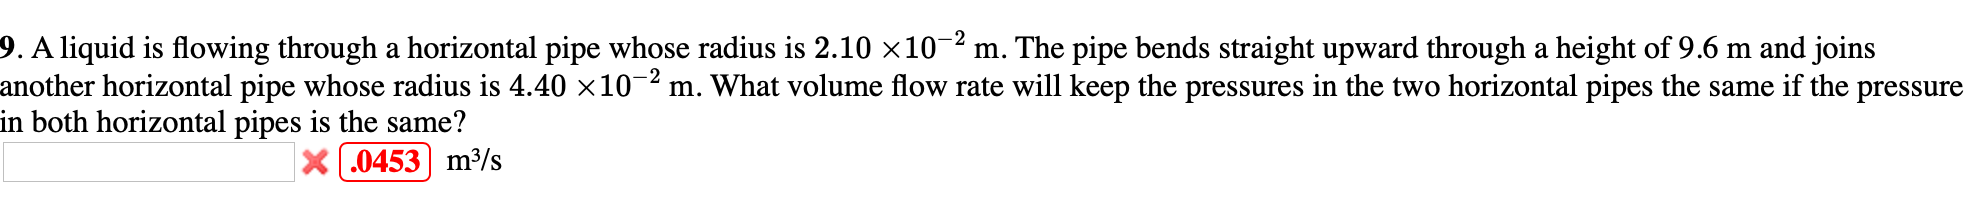 9. A liquid is flowing through a horizontal pipe whose radius is 2.10 ×10-2 m. The pipe bends straight upward through a height of 9.6 m and joins
another horizontal pipe whose radius is 4.40 x10-2 m. What volume flow rate will keep the pressures in the two horizontal pipes the same if the pressure
in both horizontal pipes is the same?
X .0453 m³/s
